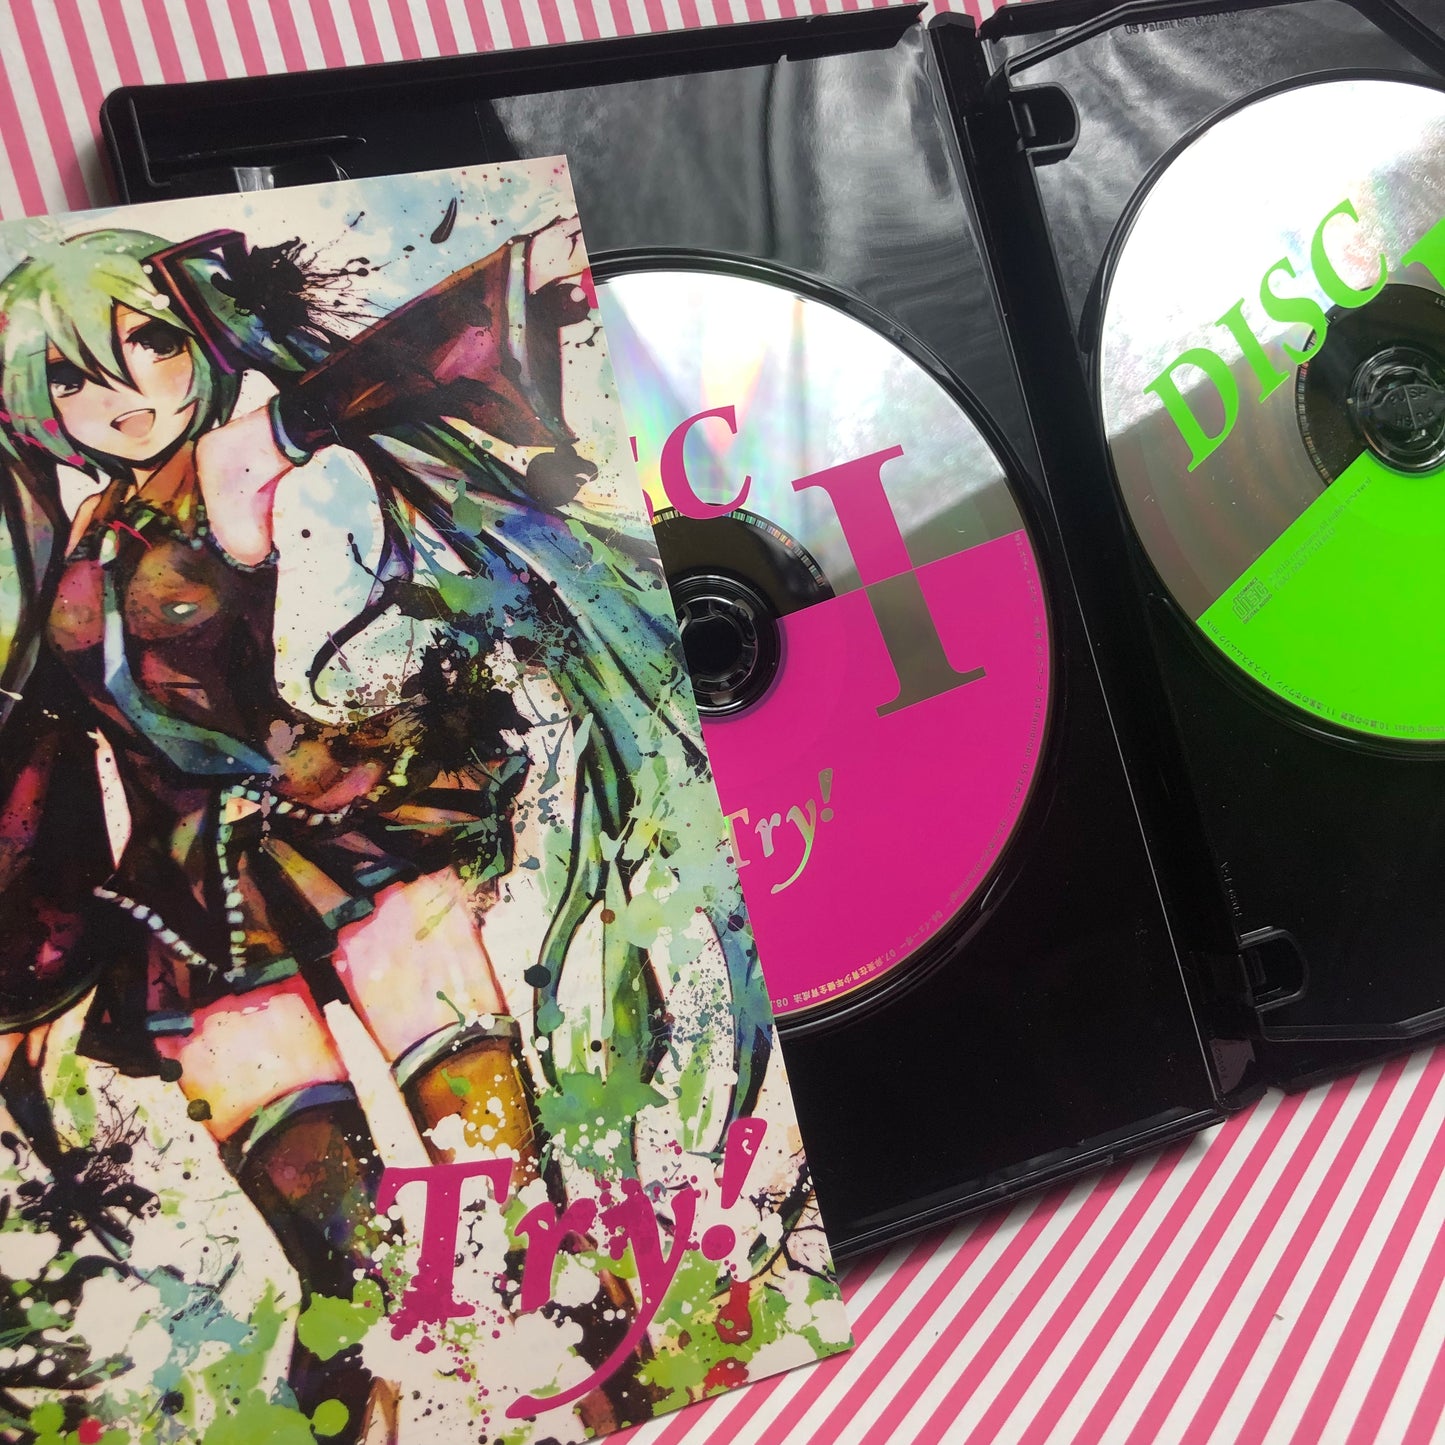 Try! - 4 CDs Vocaloid Music Compilation